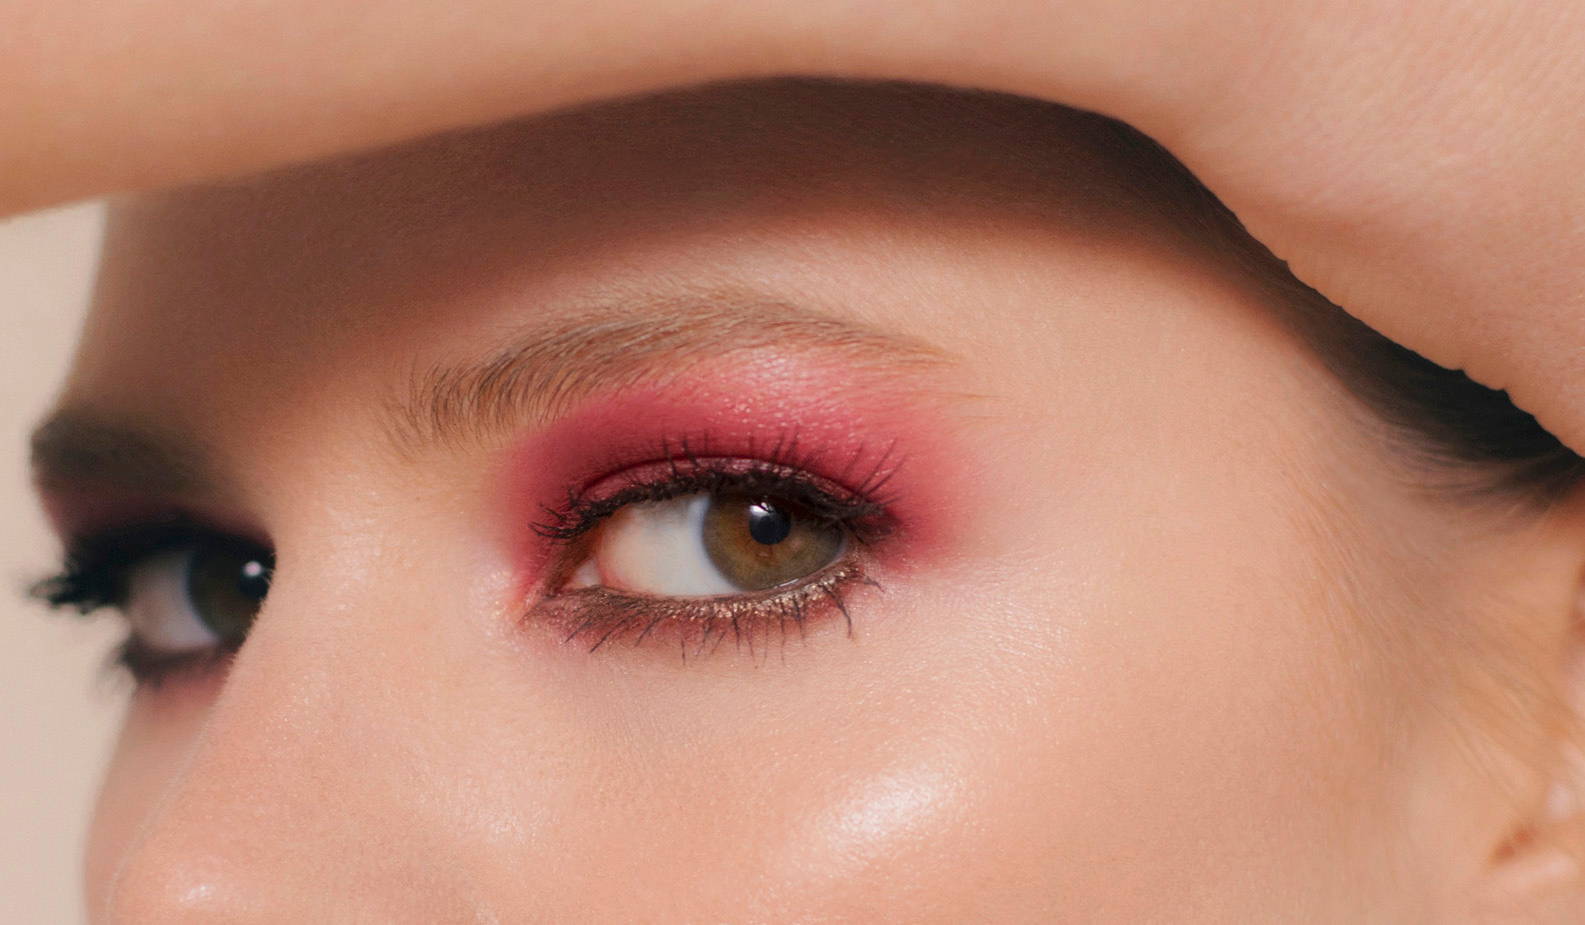 A wet eye look that works with any color